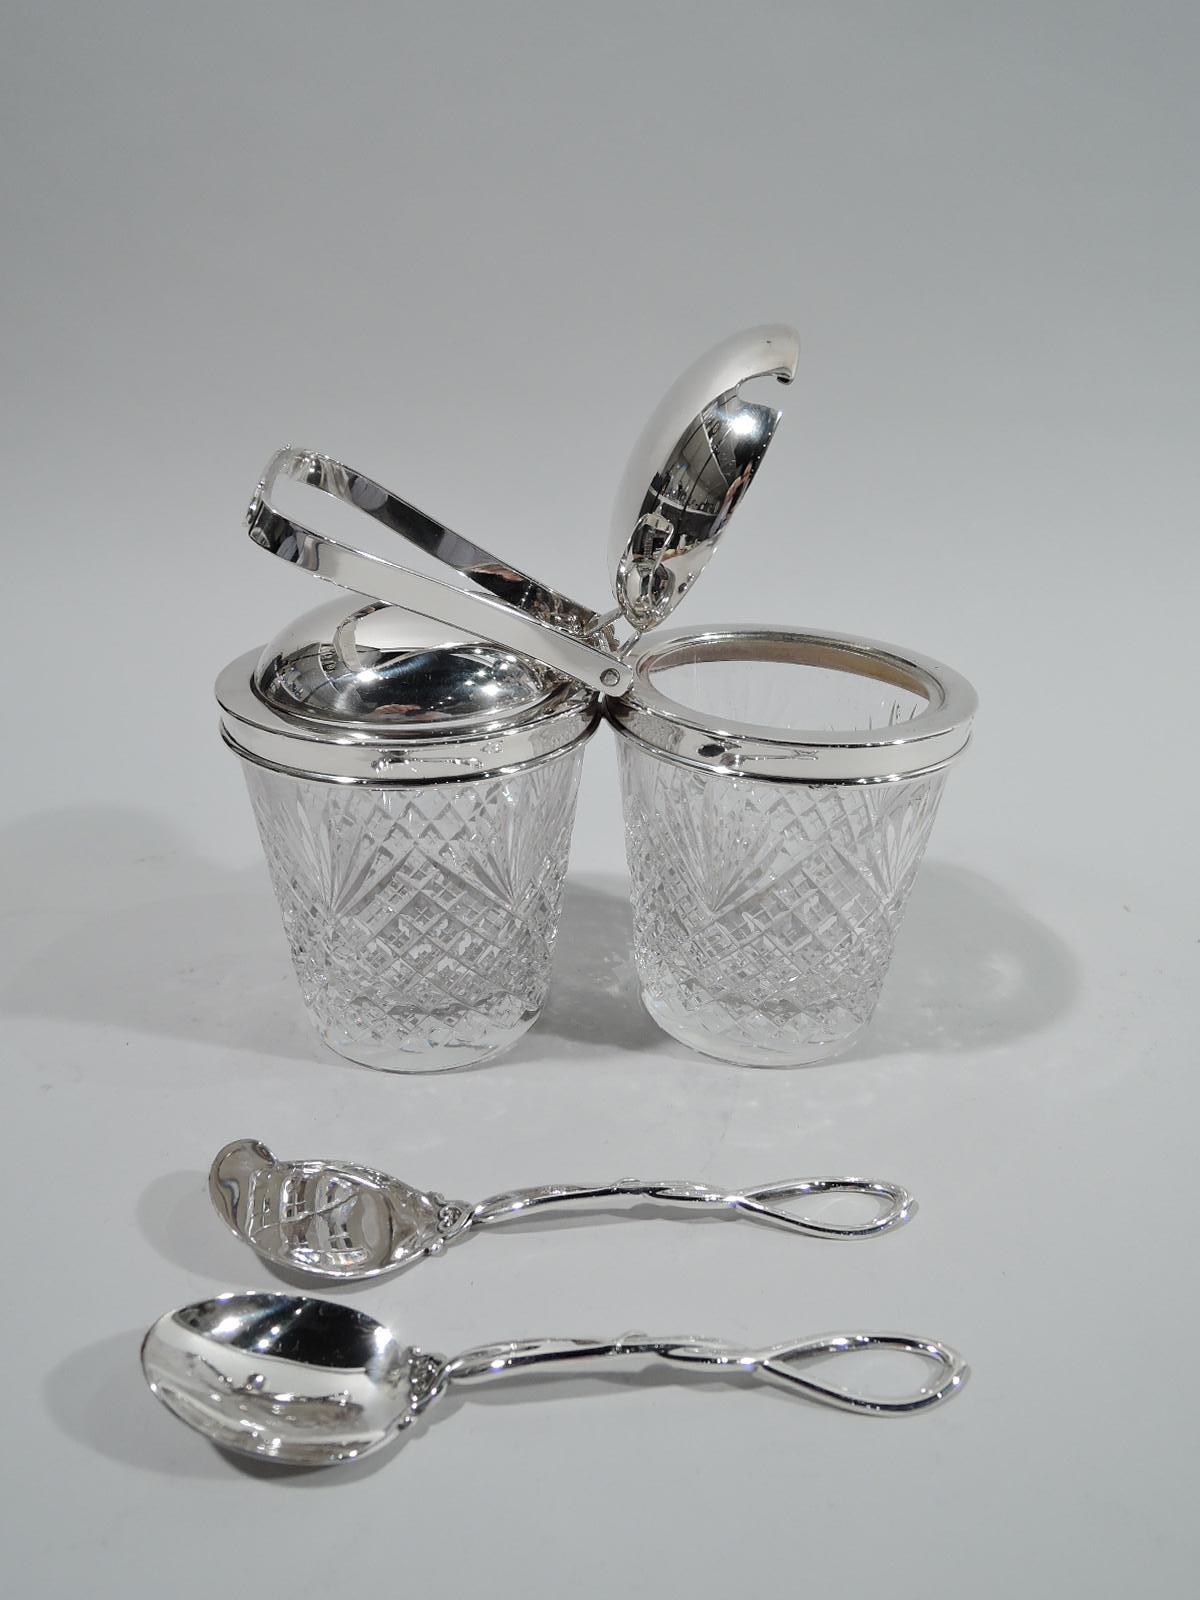 Old-fashioned sterling silver and glass double jam jar. Made by Hawkes in Corning, New York, ca 1950. Two jars, each with straight and tapering sides and raised diaper and fern pattern. Sterling silver collars joined by mount with open and tapering